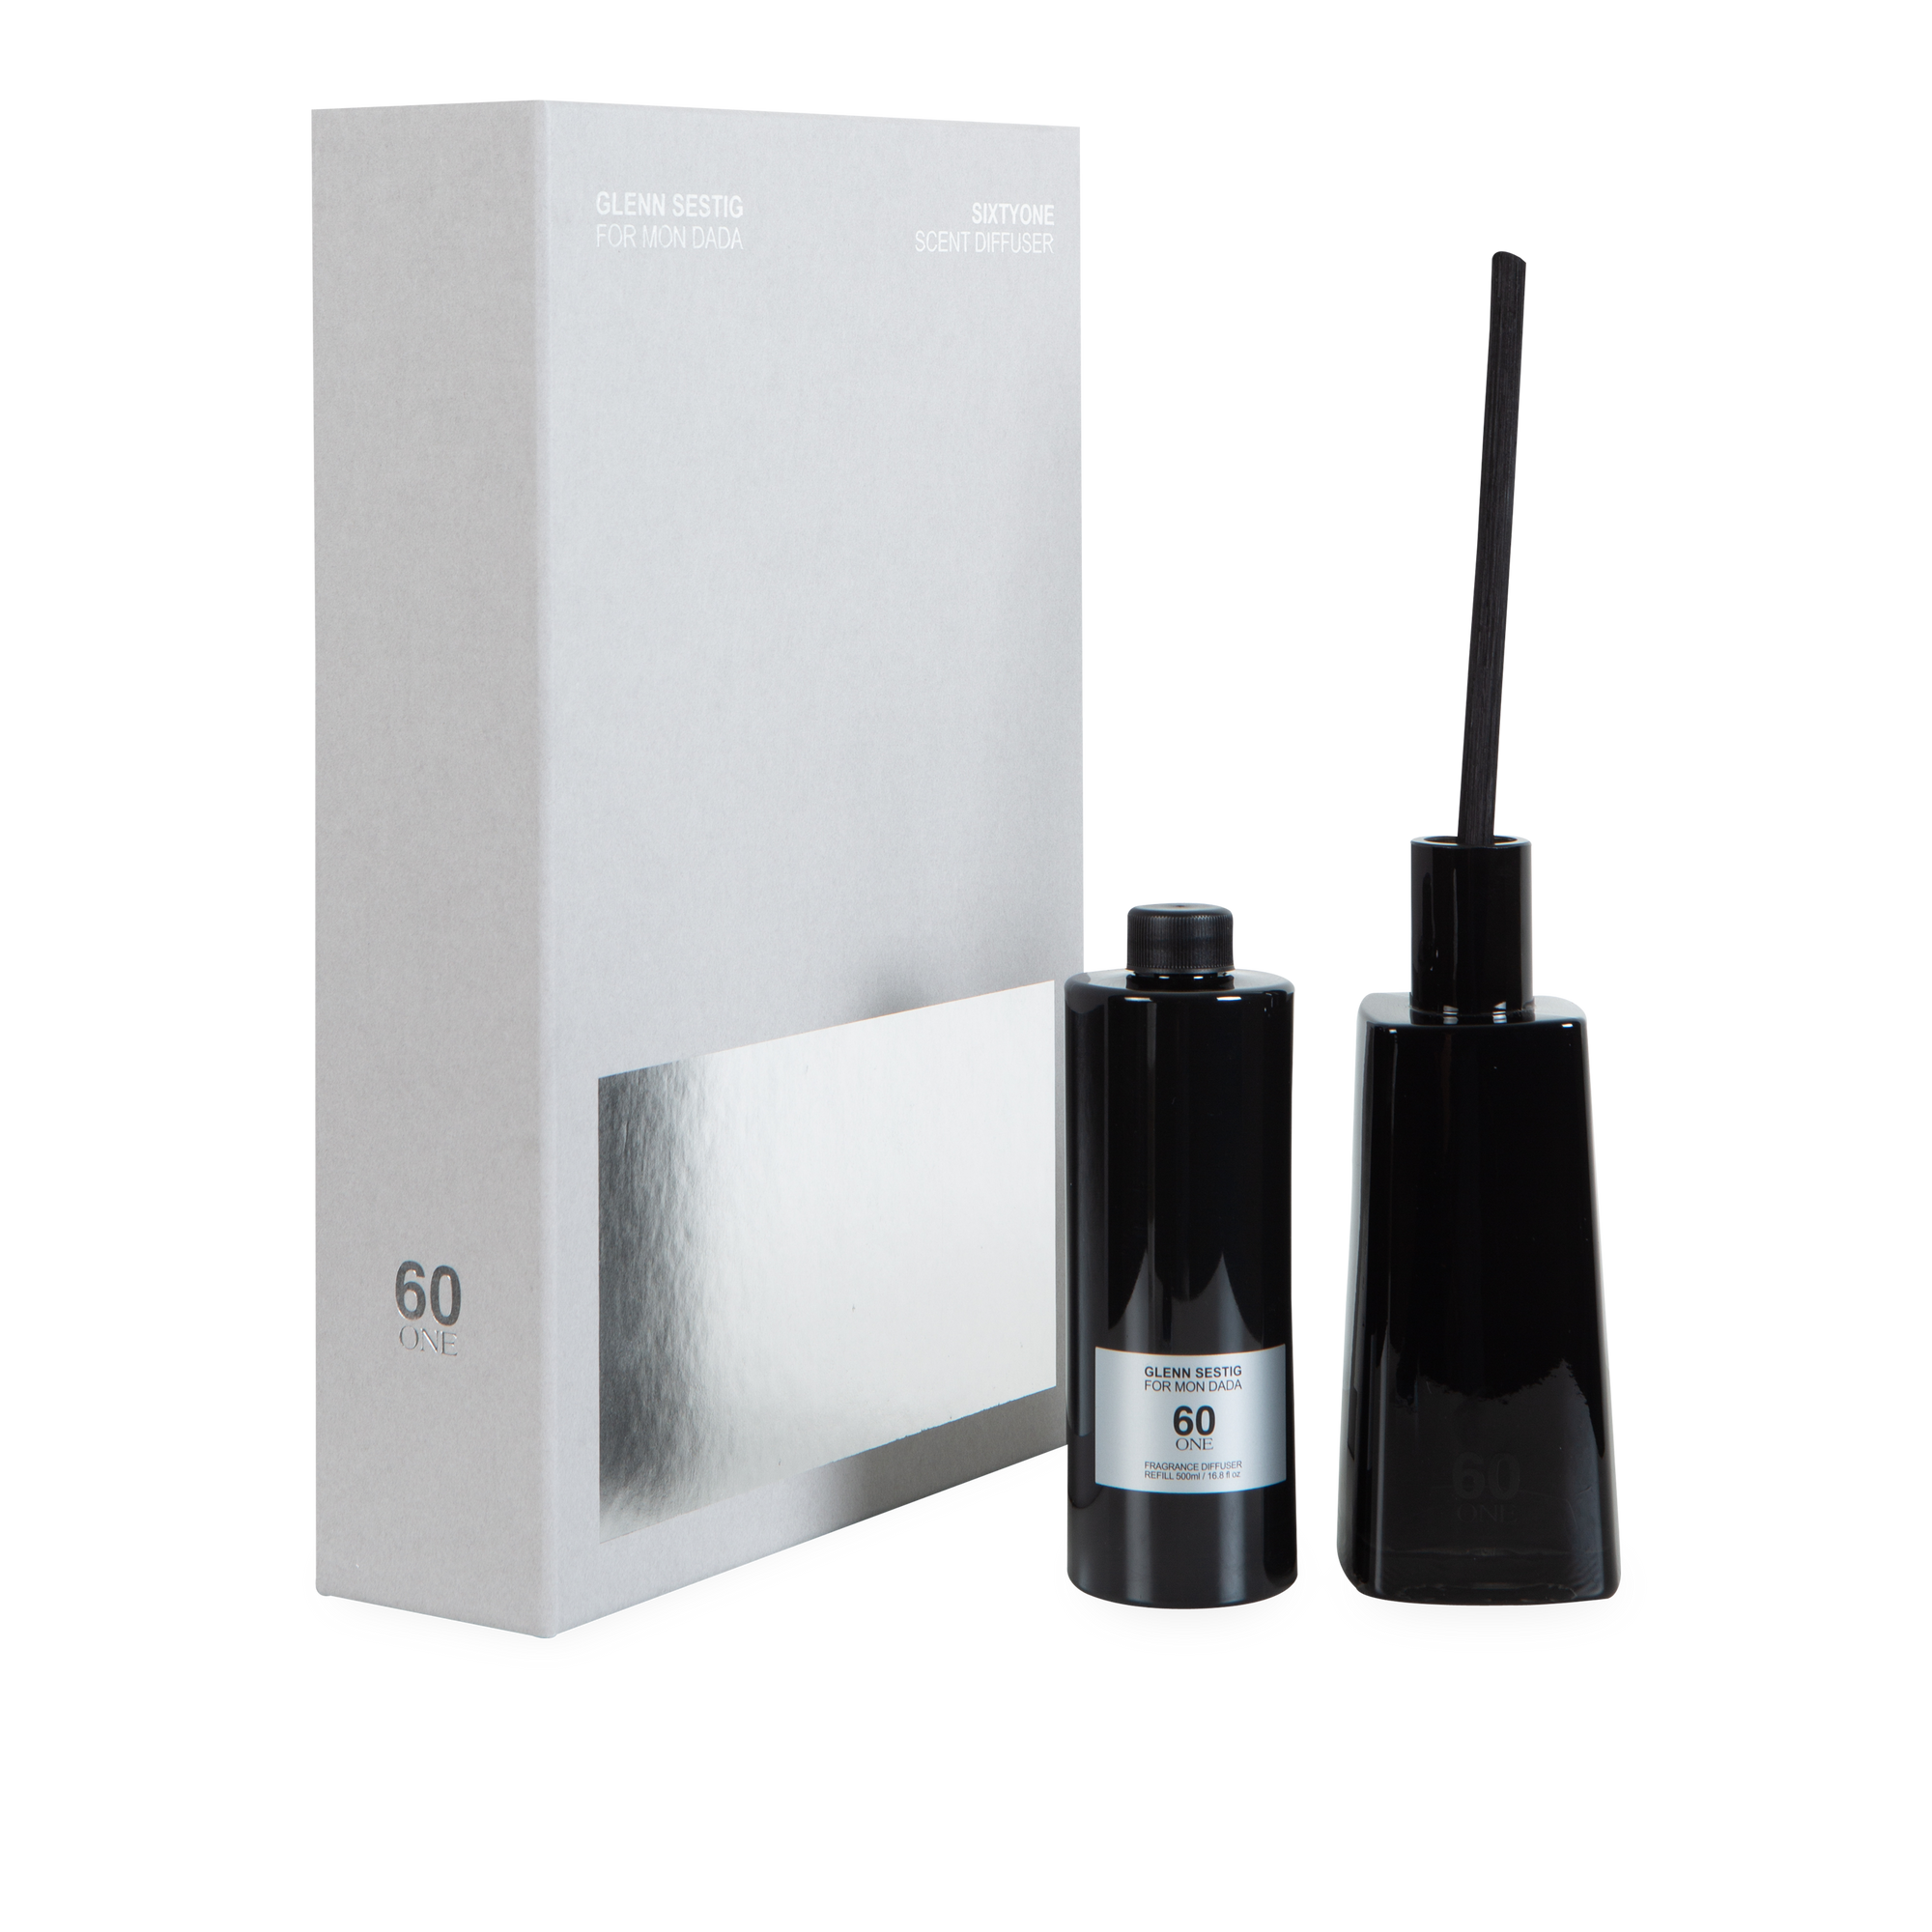 A statement, yet refined diffuser with the memorable fragrance 60 ONE, designed by architect Glenn Sestig.